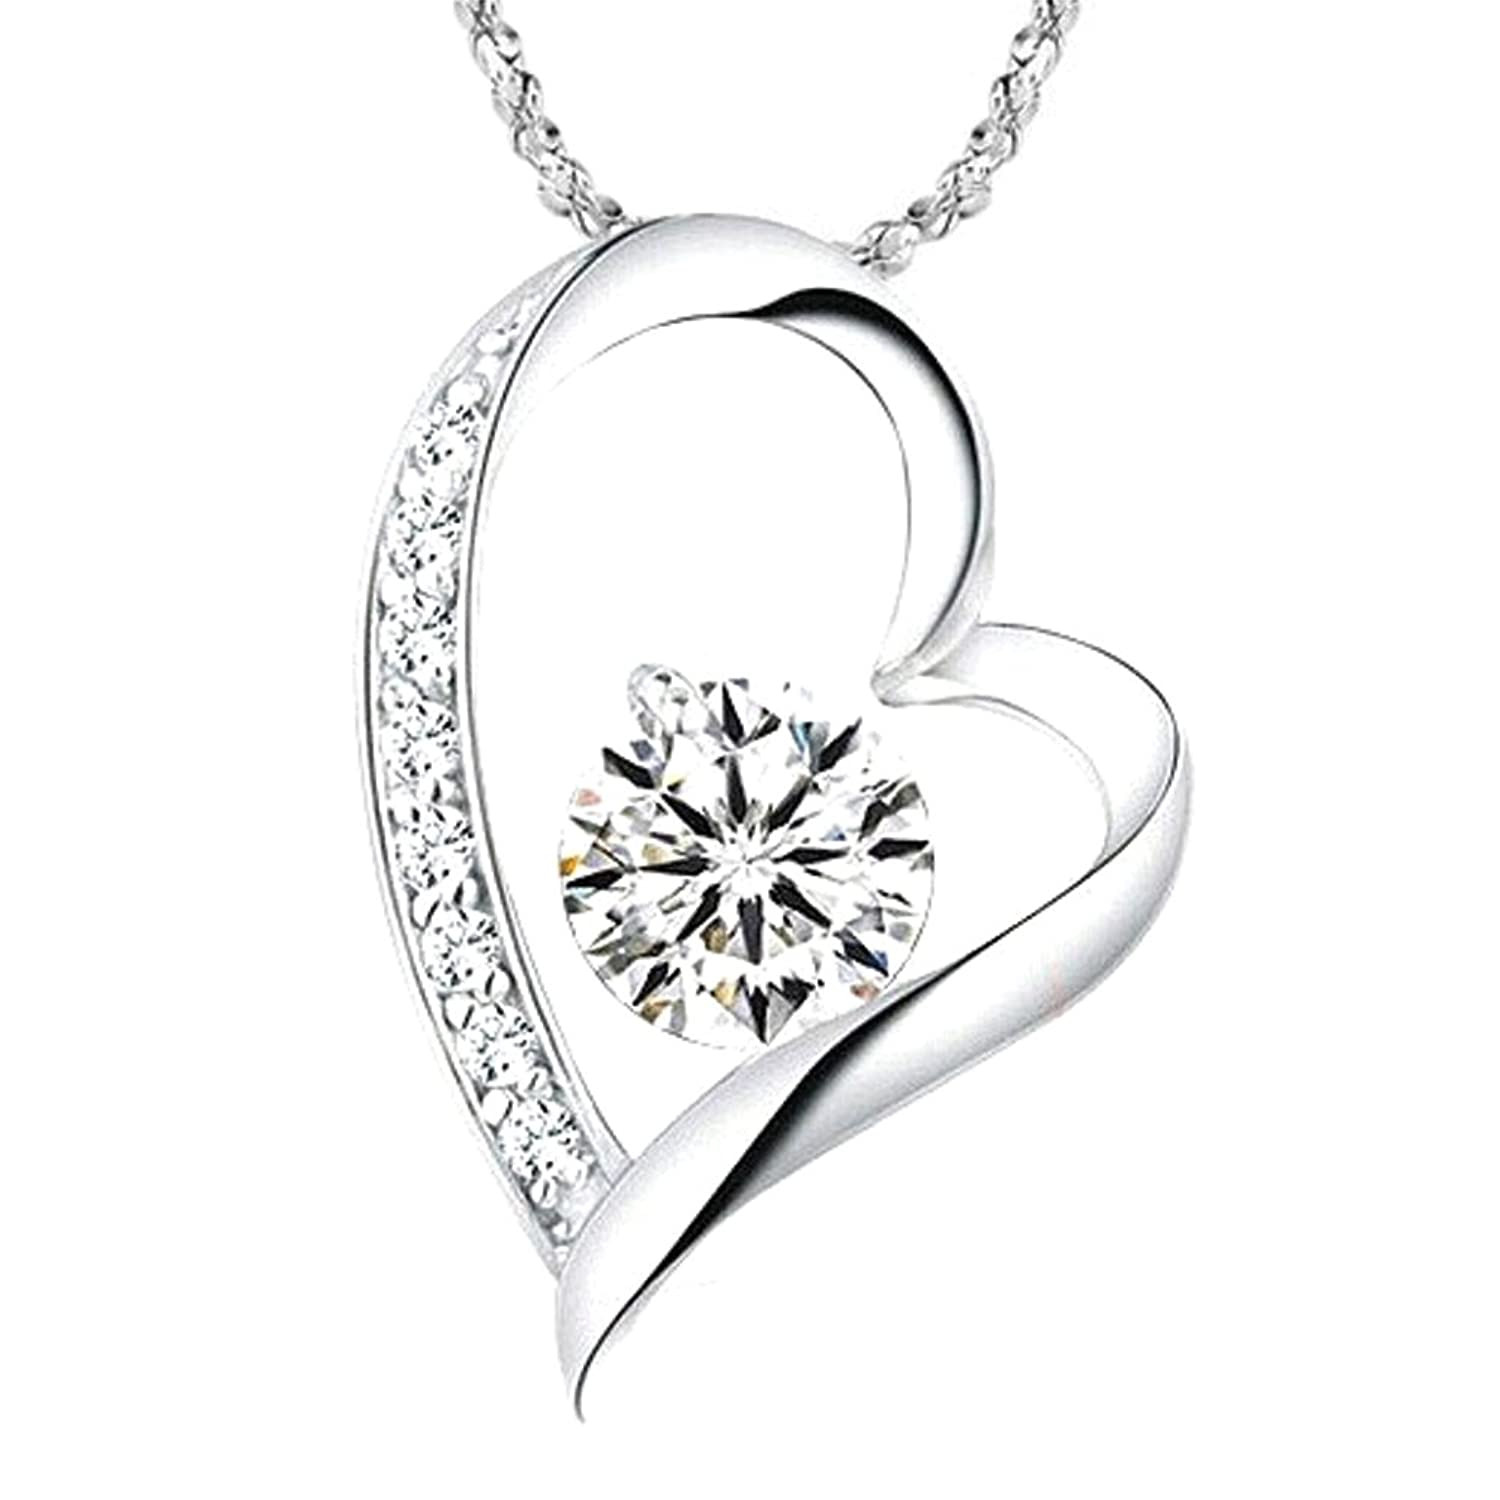 Mom Necklace White Gold
 14K White Gold Overlay I Love You Heart Pendant Necklace